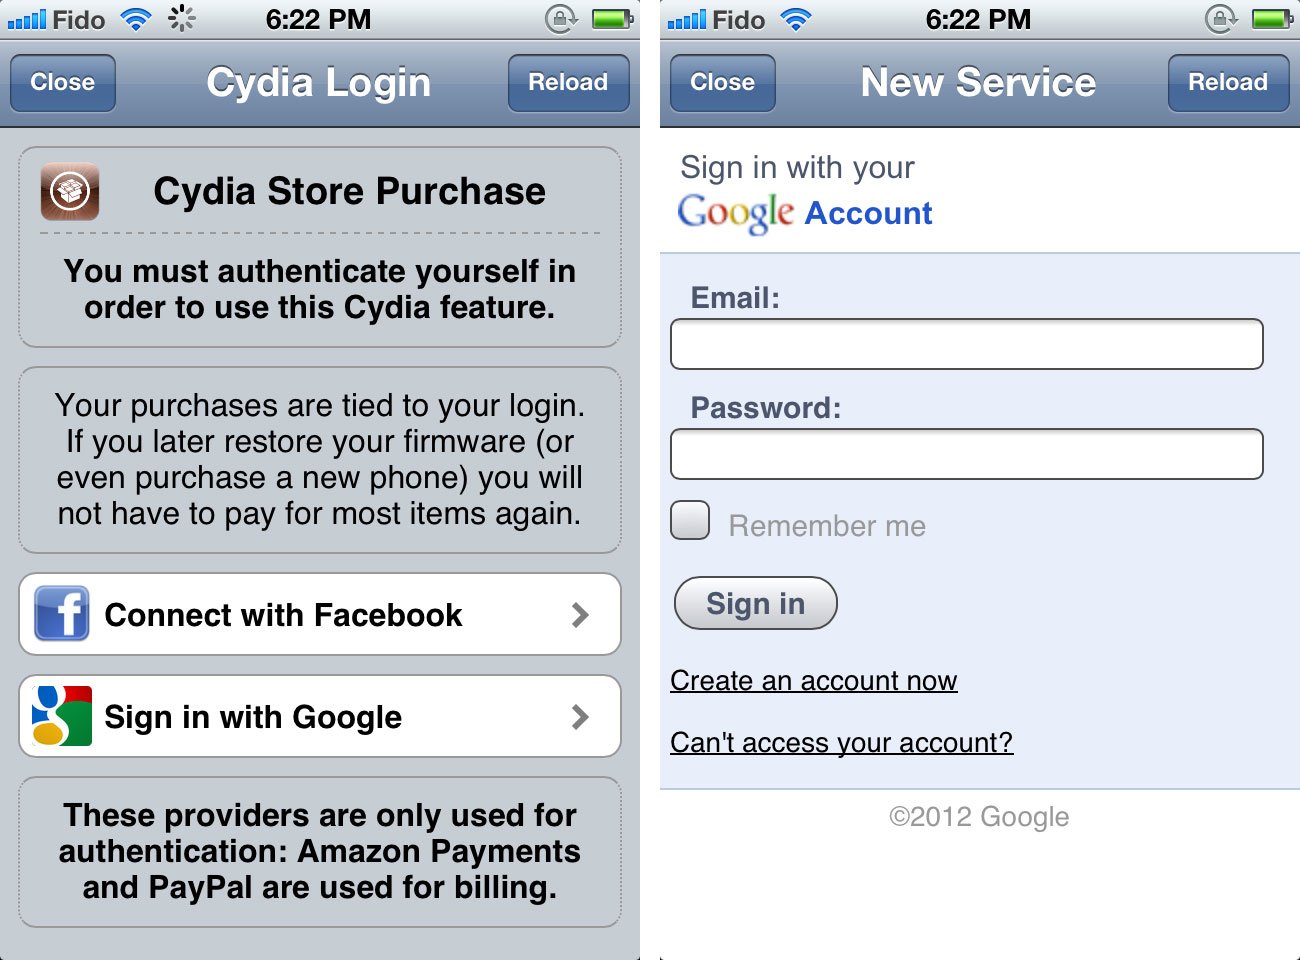 With Cydia you have to login to your account via Google or Facebok (even if you don't like either service)